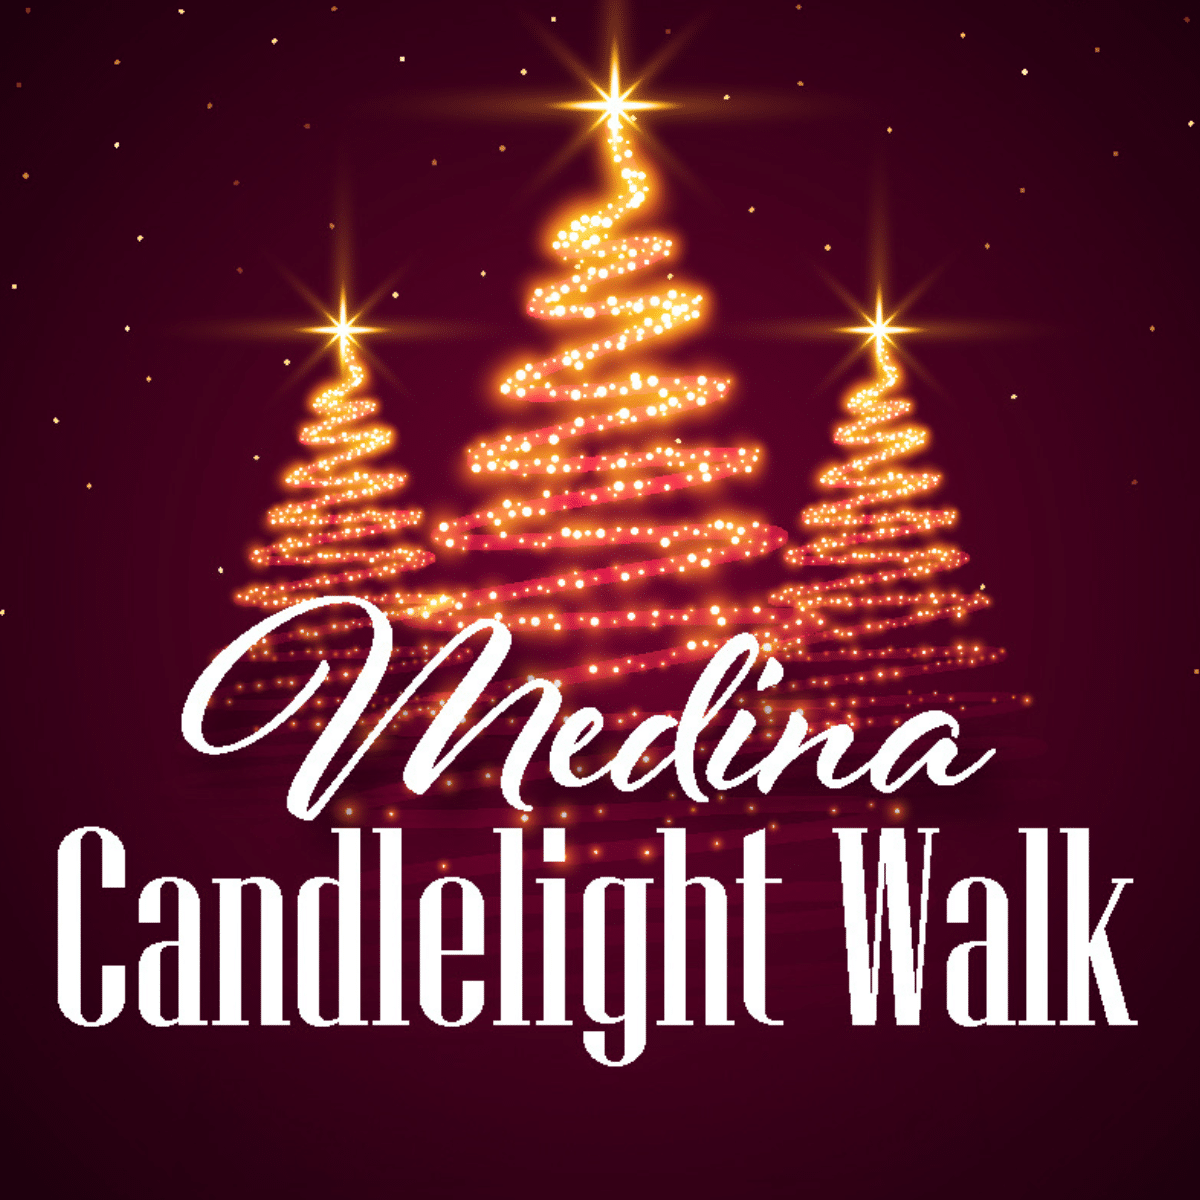 square image of three stylized glowing christmas trees with the text Medina Candlelight Walk across it